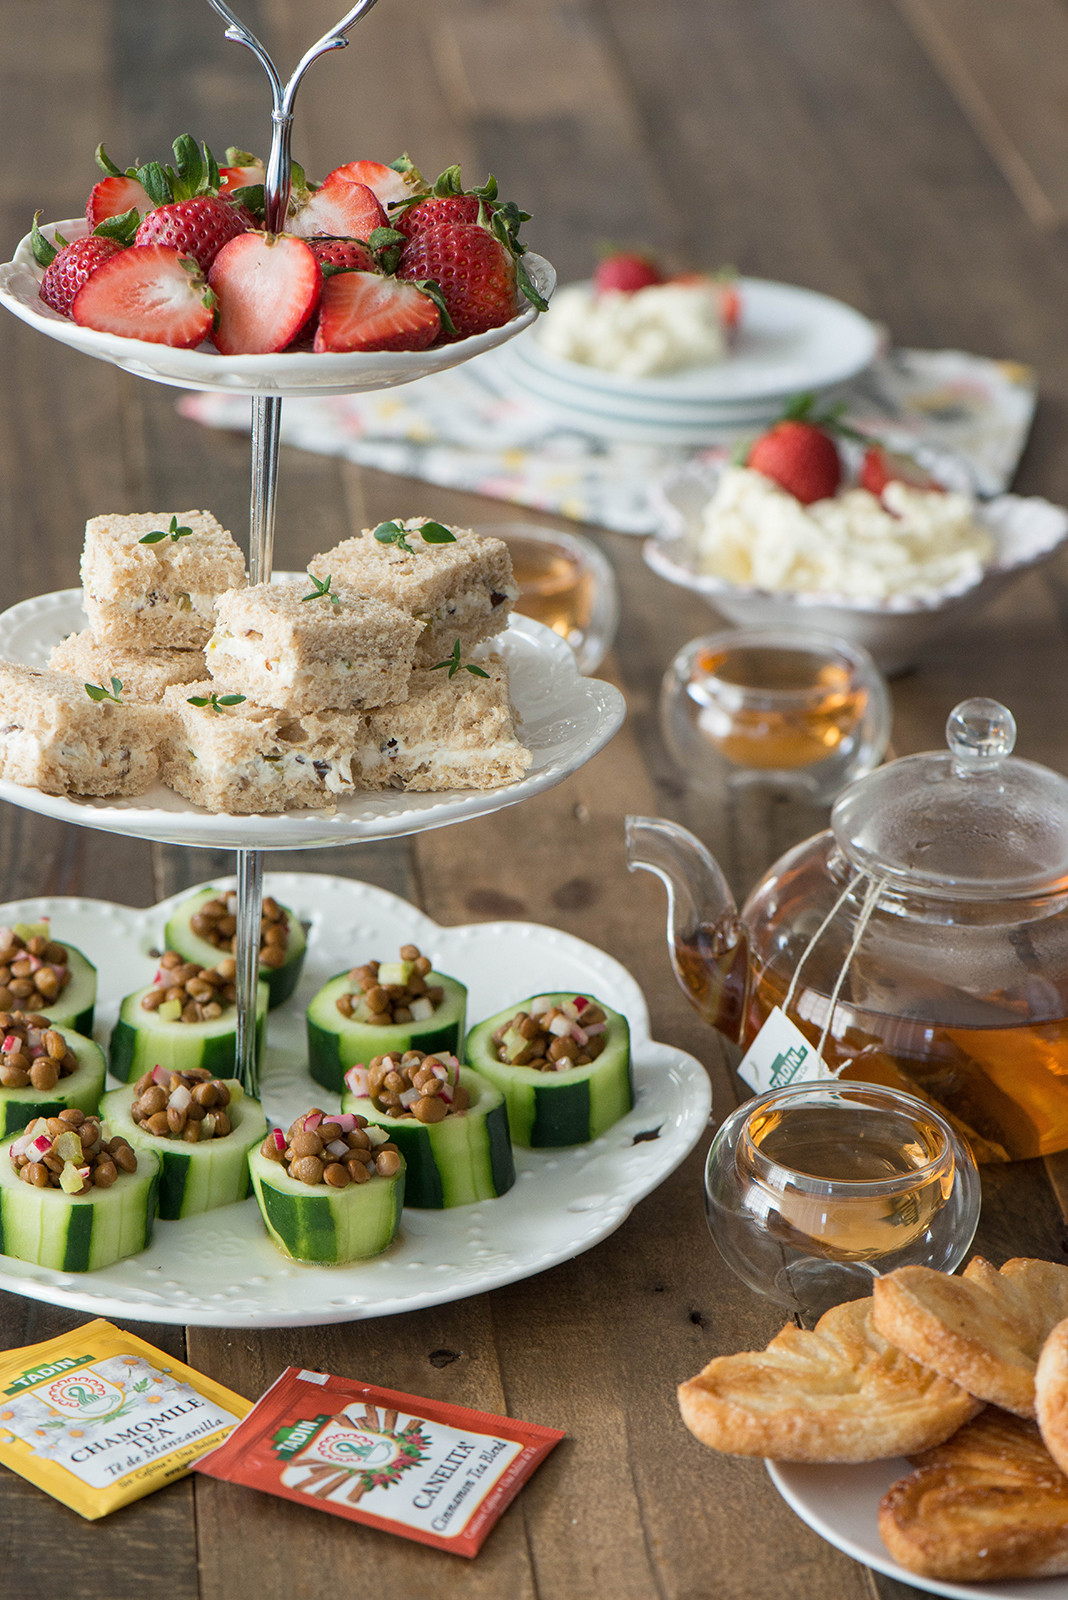 Tea Party Snack Ideas
 A Simple Tea Party Menu Nibbles and Feasts